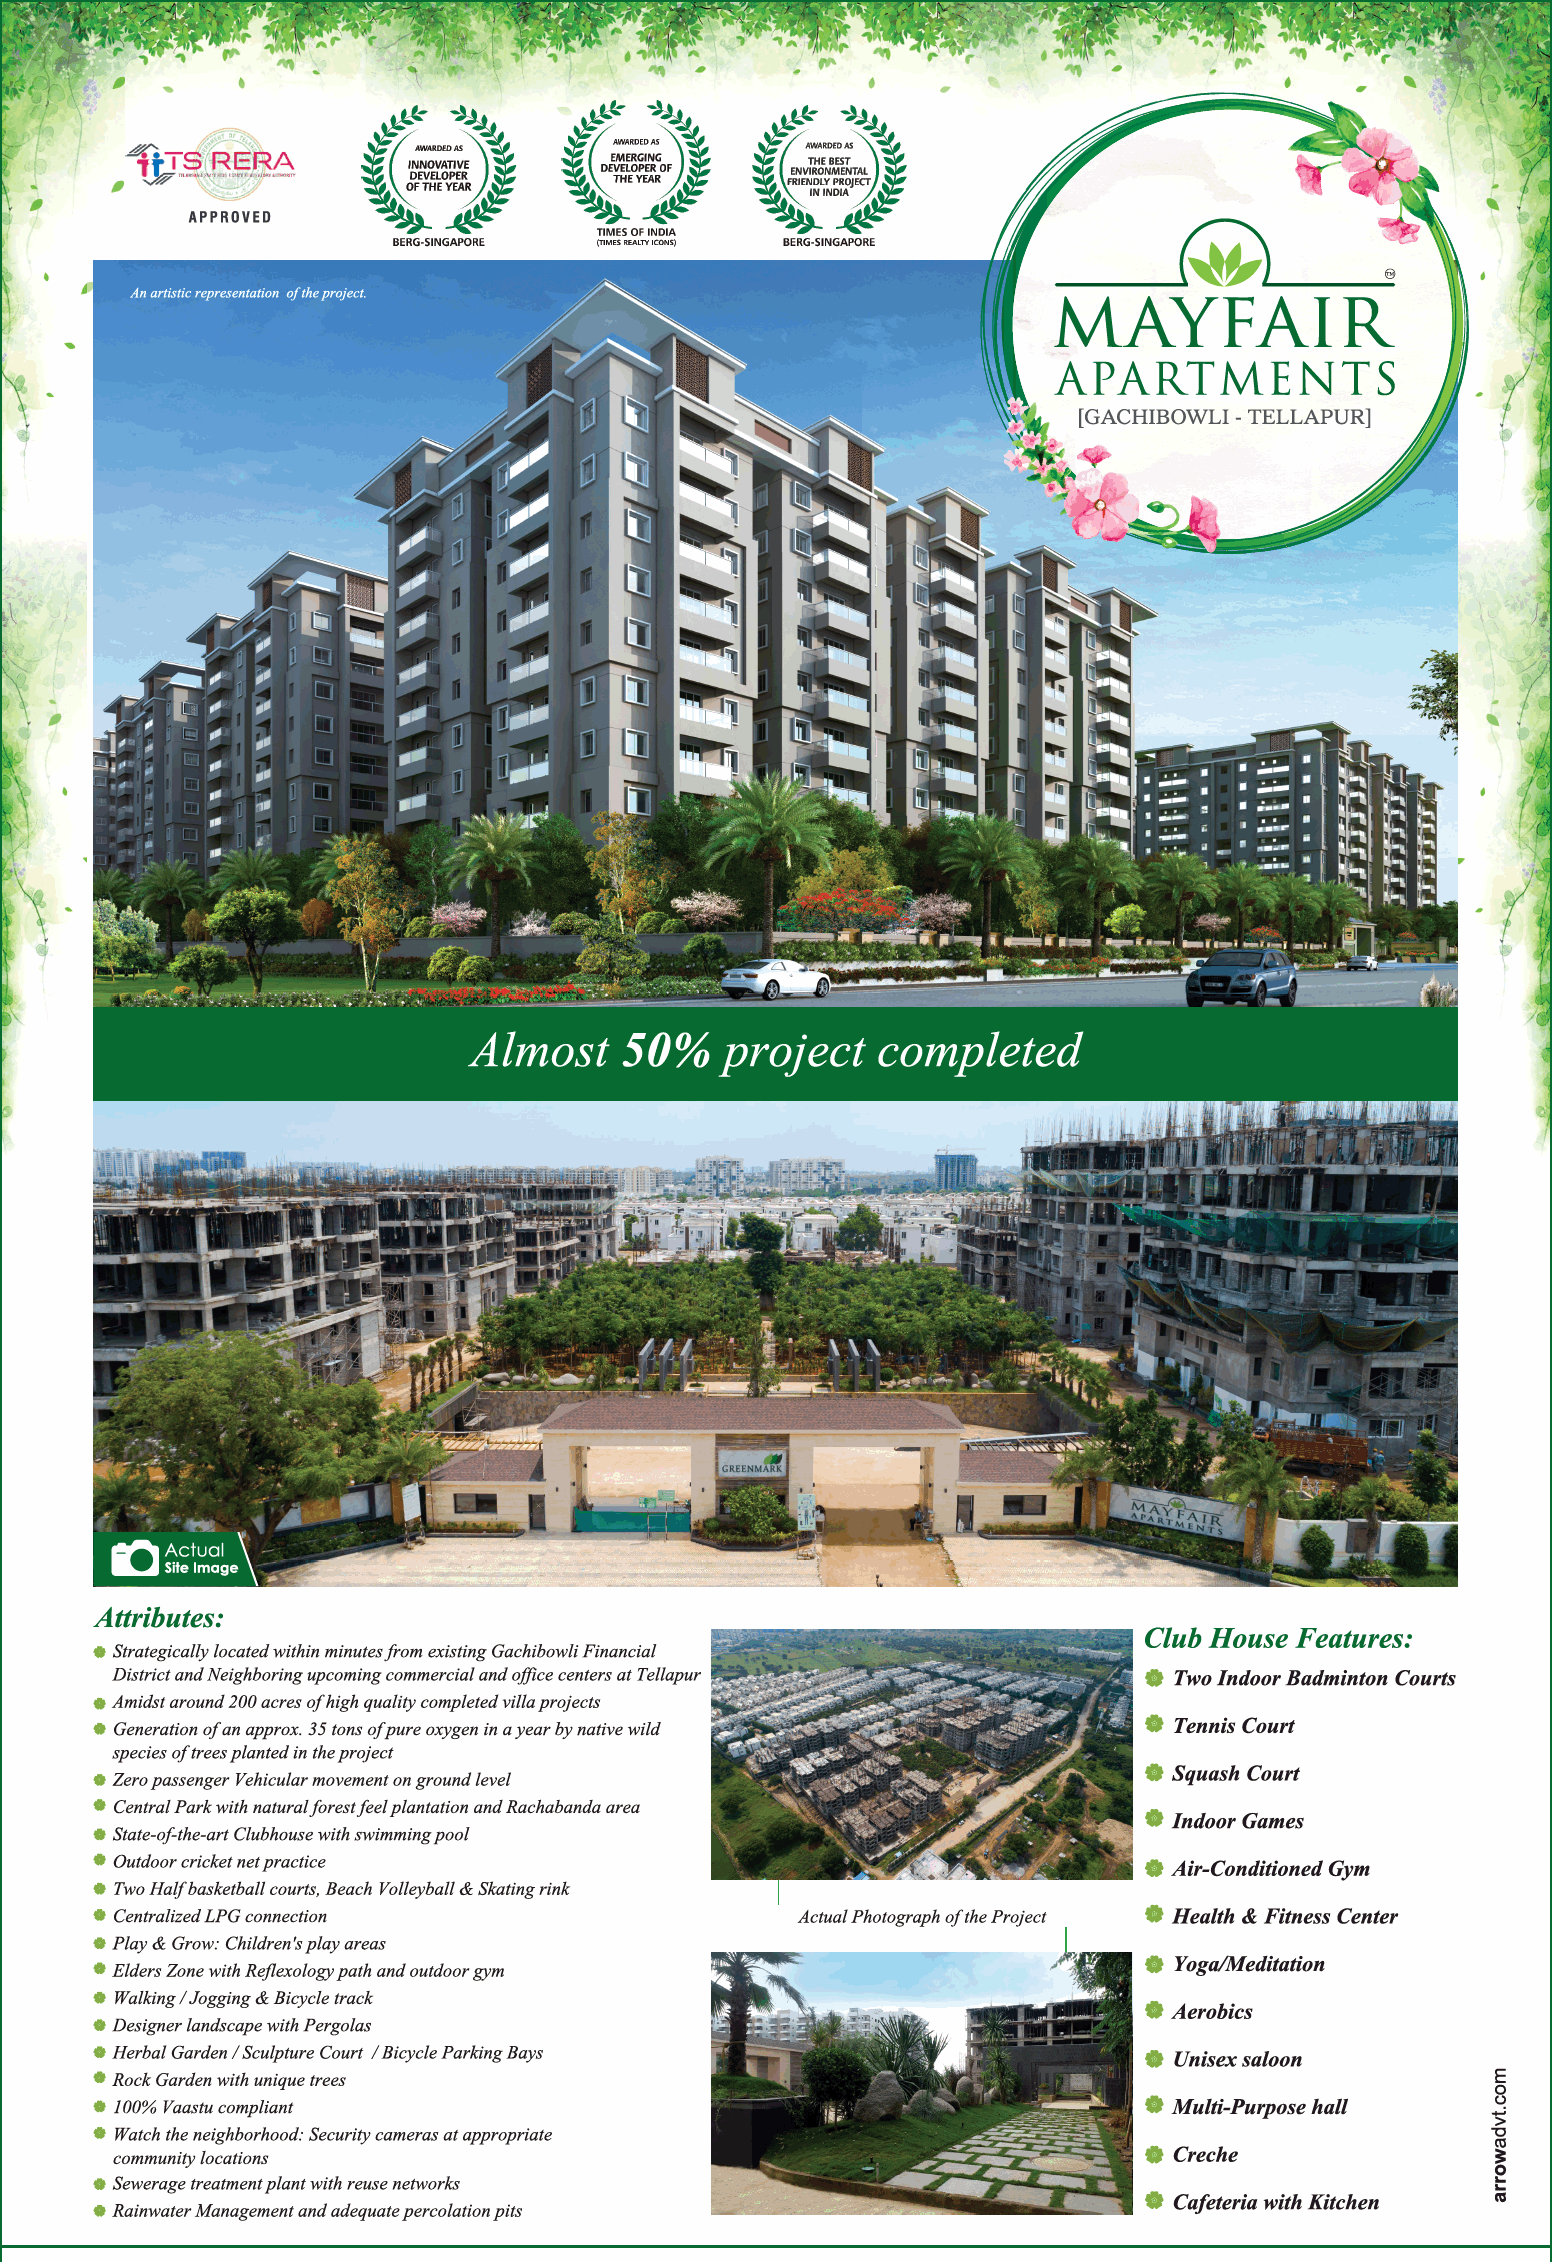 Greenmark Mayfair Apartments in Tellapur, Hyderabad almost 50% project completed Update